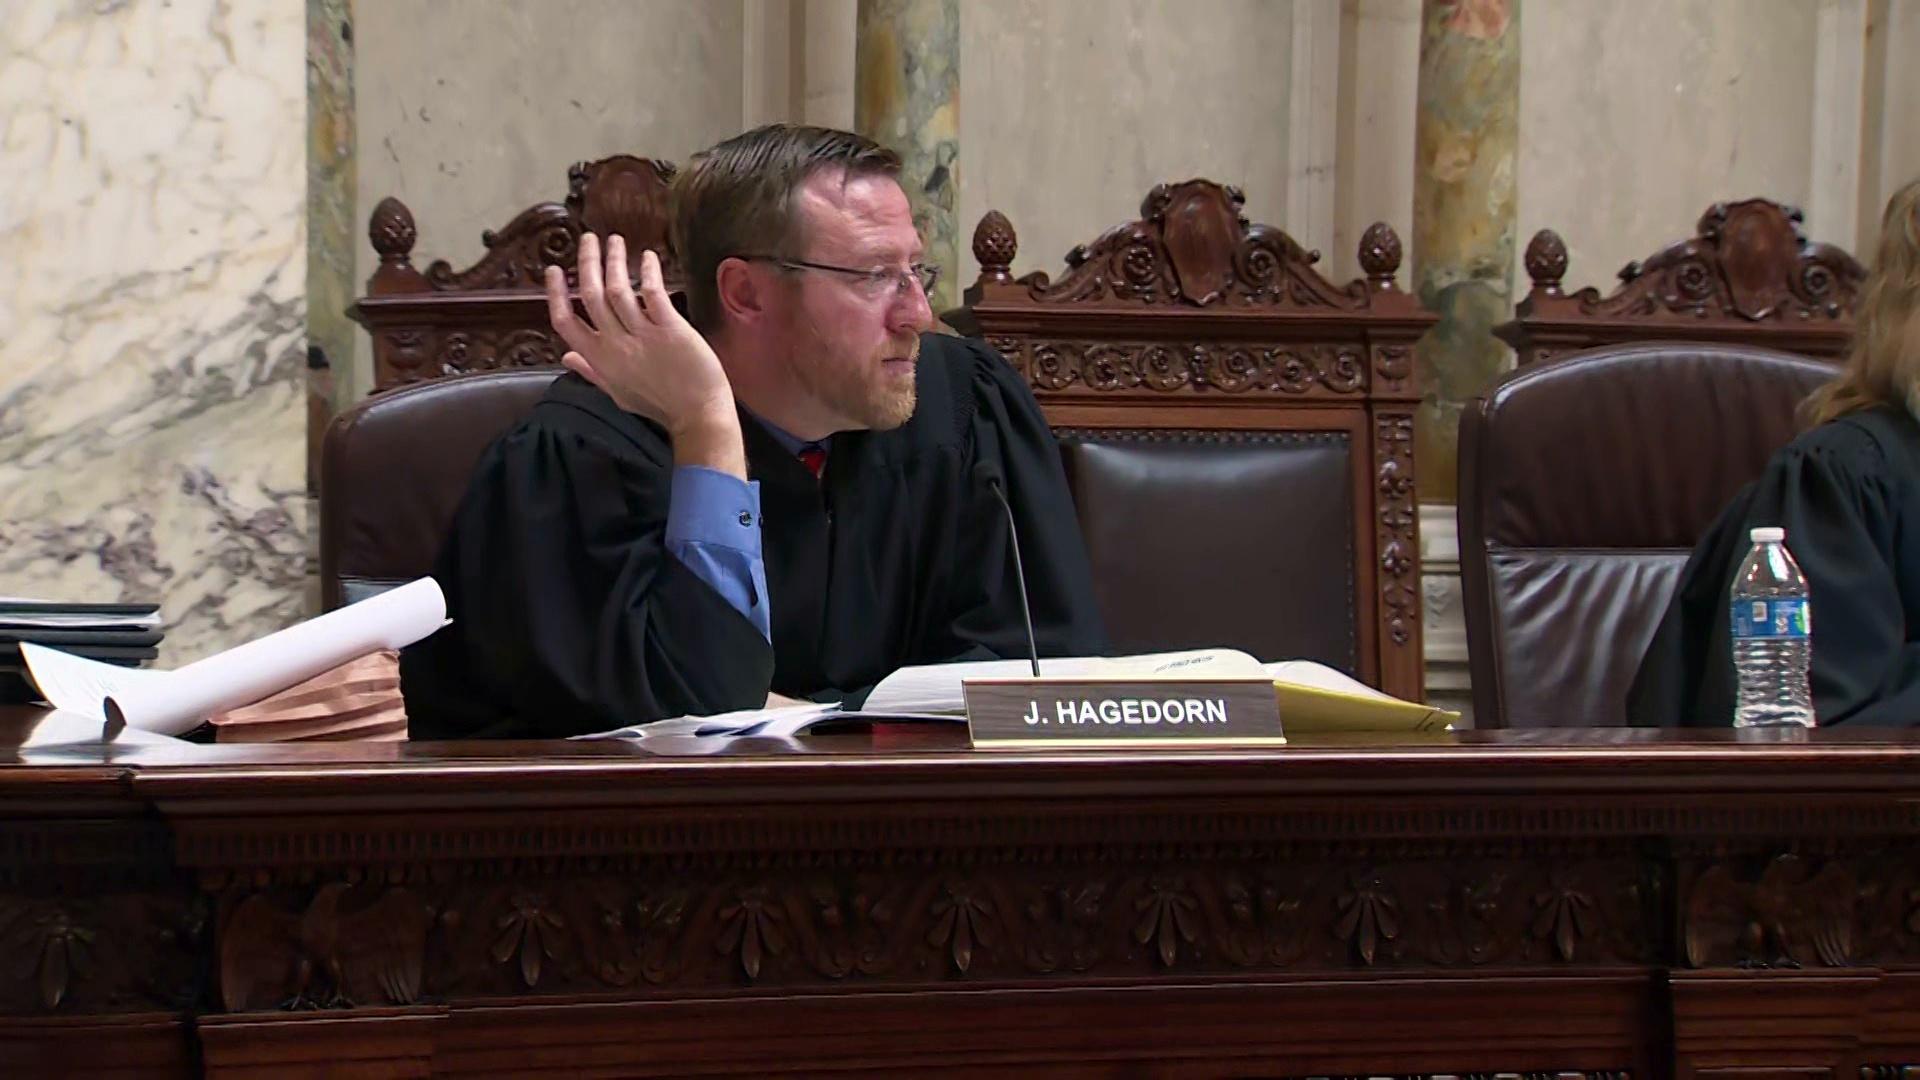 A still image from a video shows Brian Hagedorn holding his right hand up while seated in a high-backed chair behind a wooden dais in a room with marble walls and pillars.